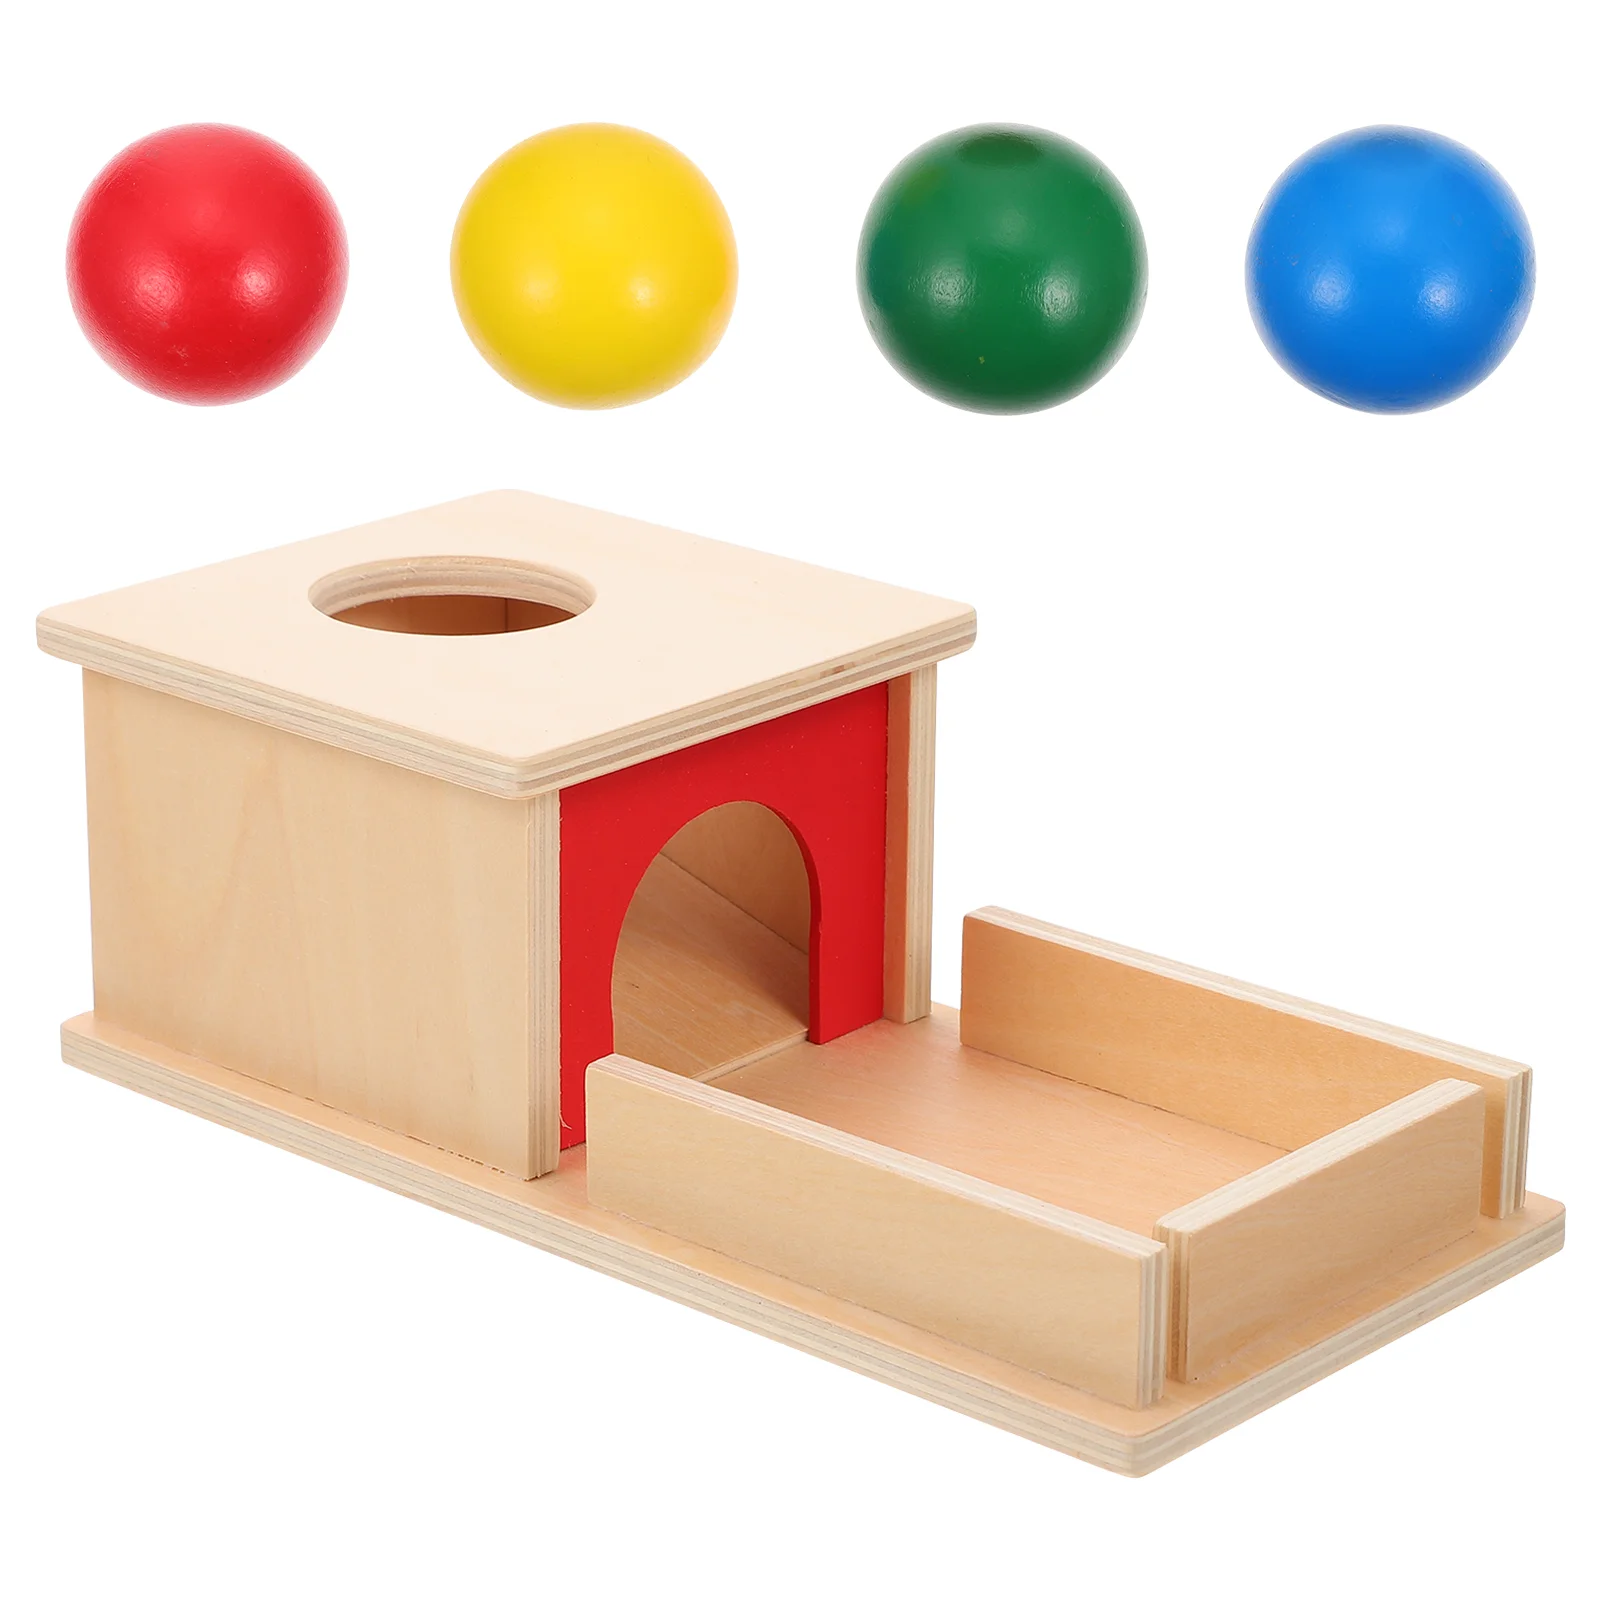 

Educational Toy Montessori Teaching Aids Toy Cognitive Toys Box Child Hand-eye Coordination Wood Wooden Plaything Baby